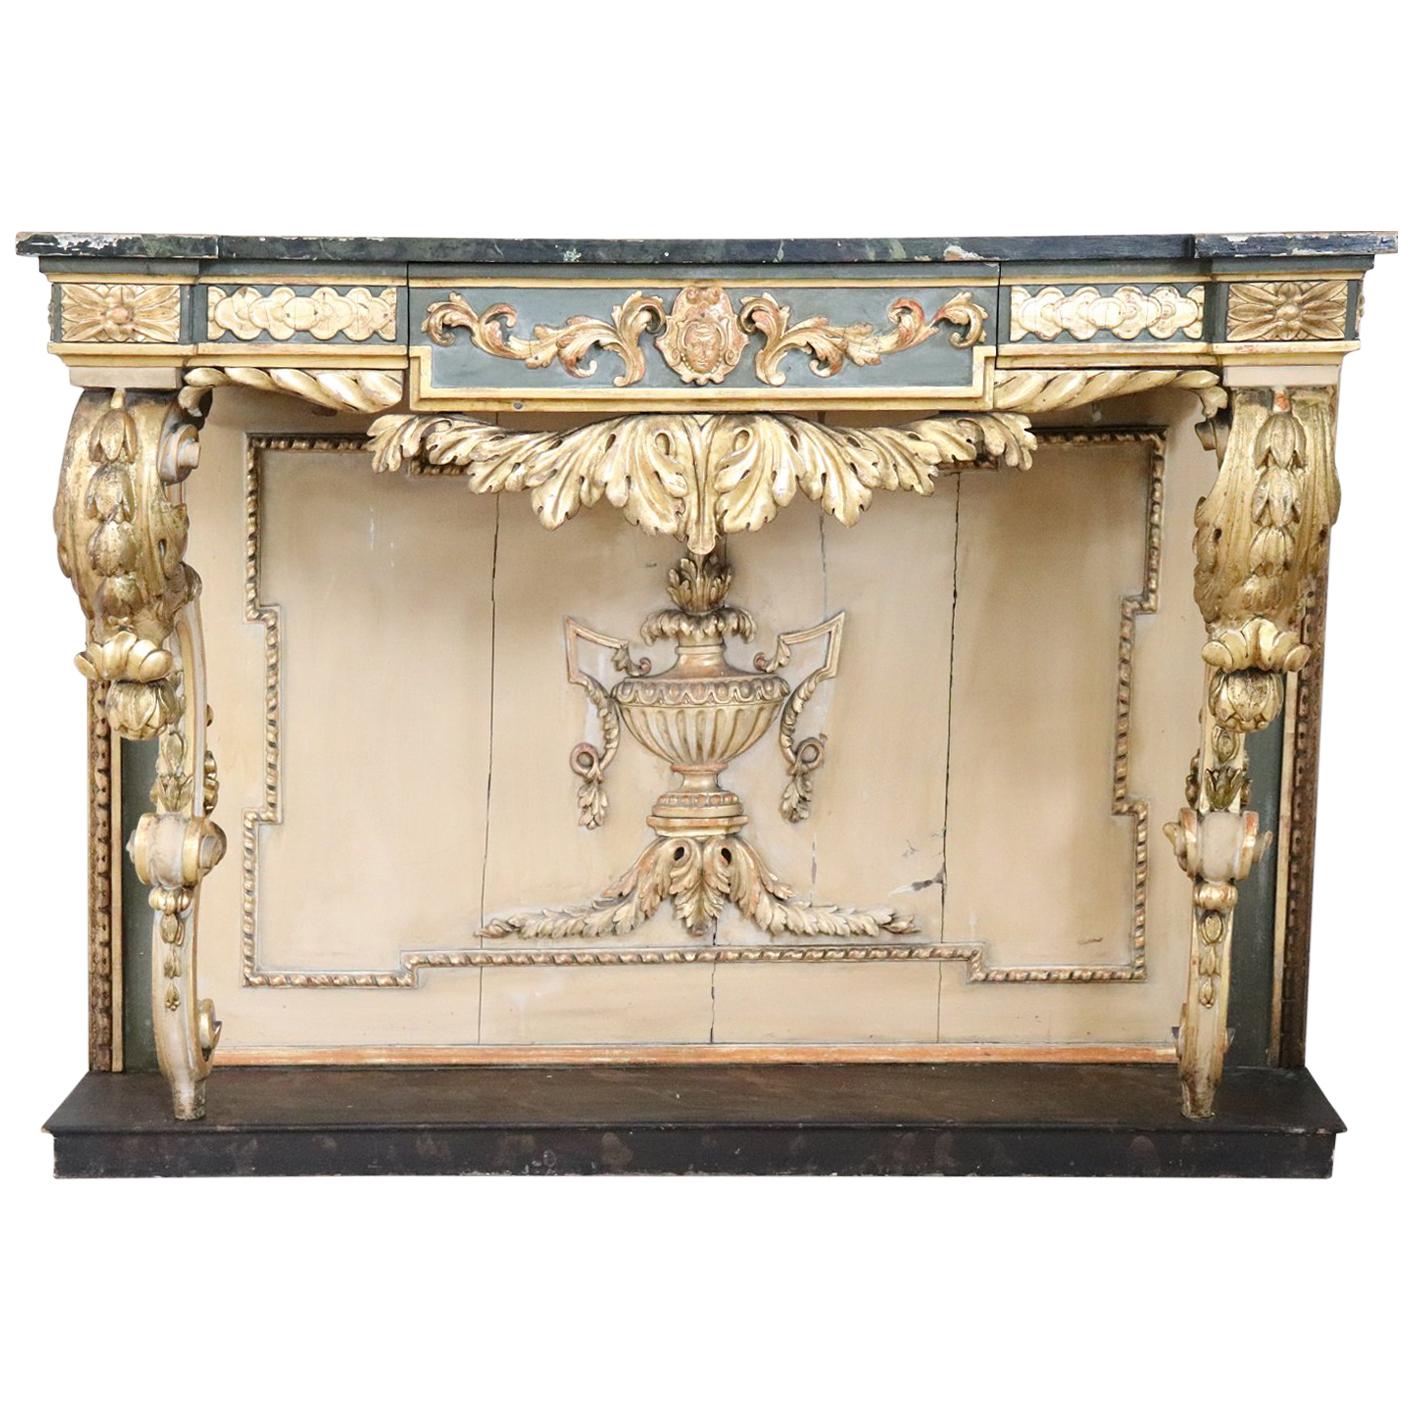 19th Century Italian Golden and Lacquered Wood Large Console Table